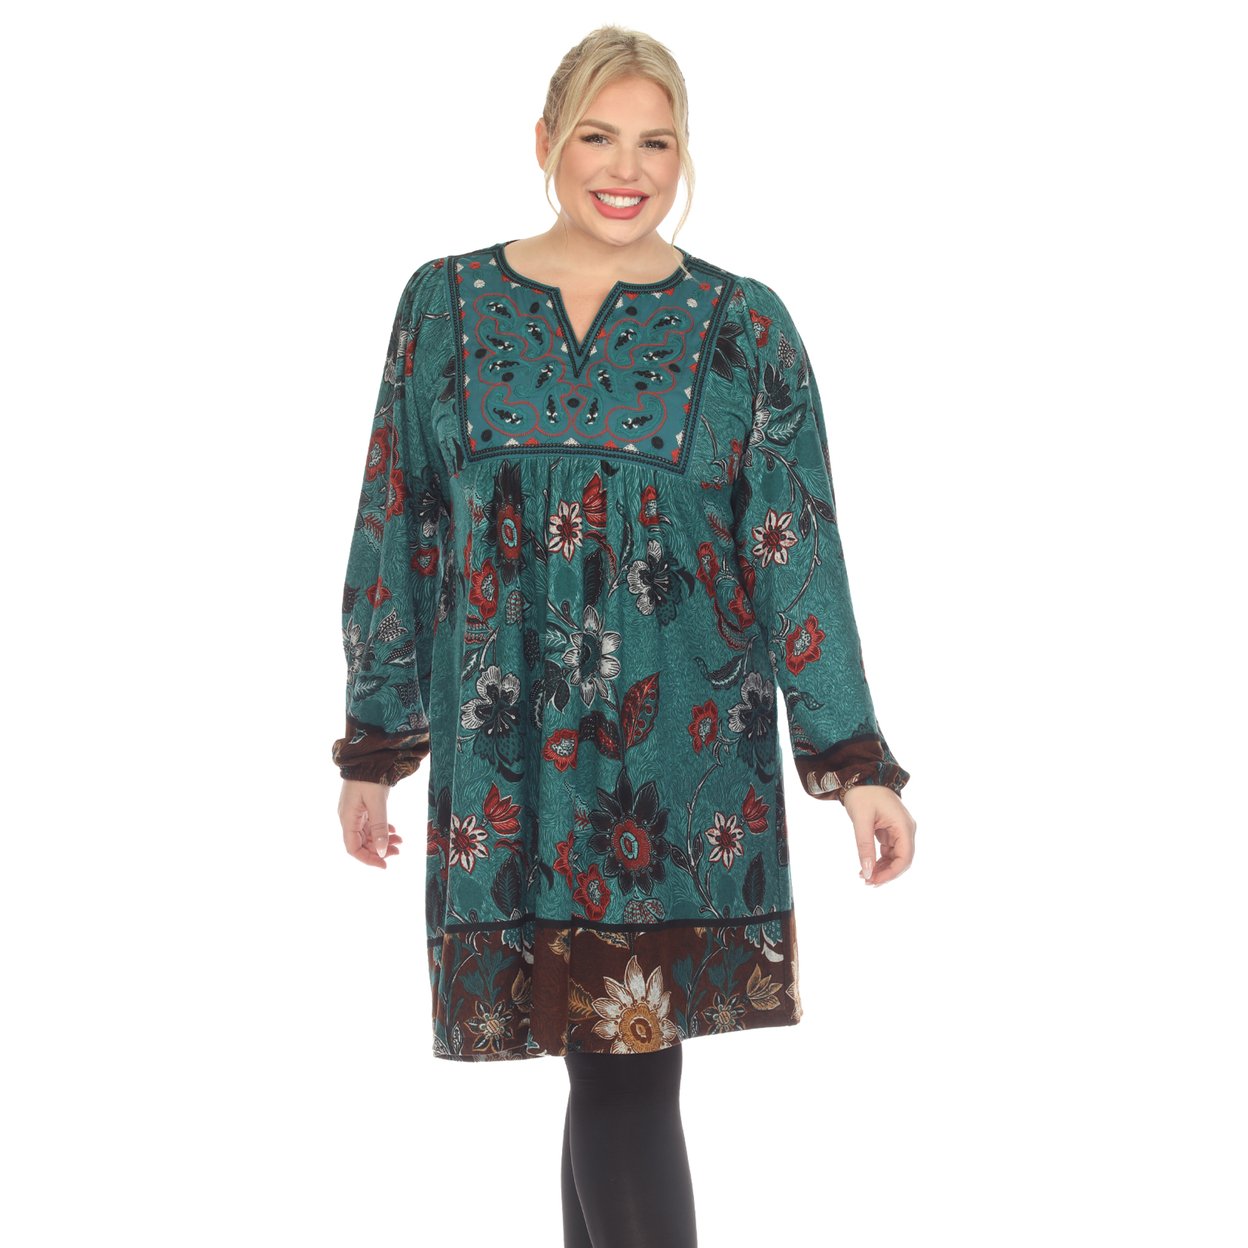 White Mark Women's Floral Paisley Sweater Dress - Teal, 1x